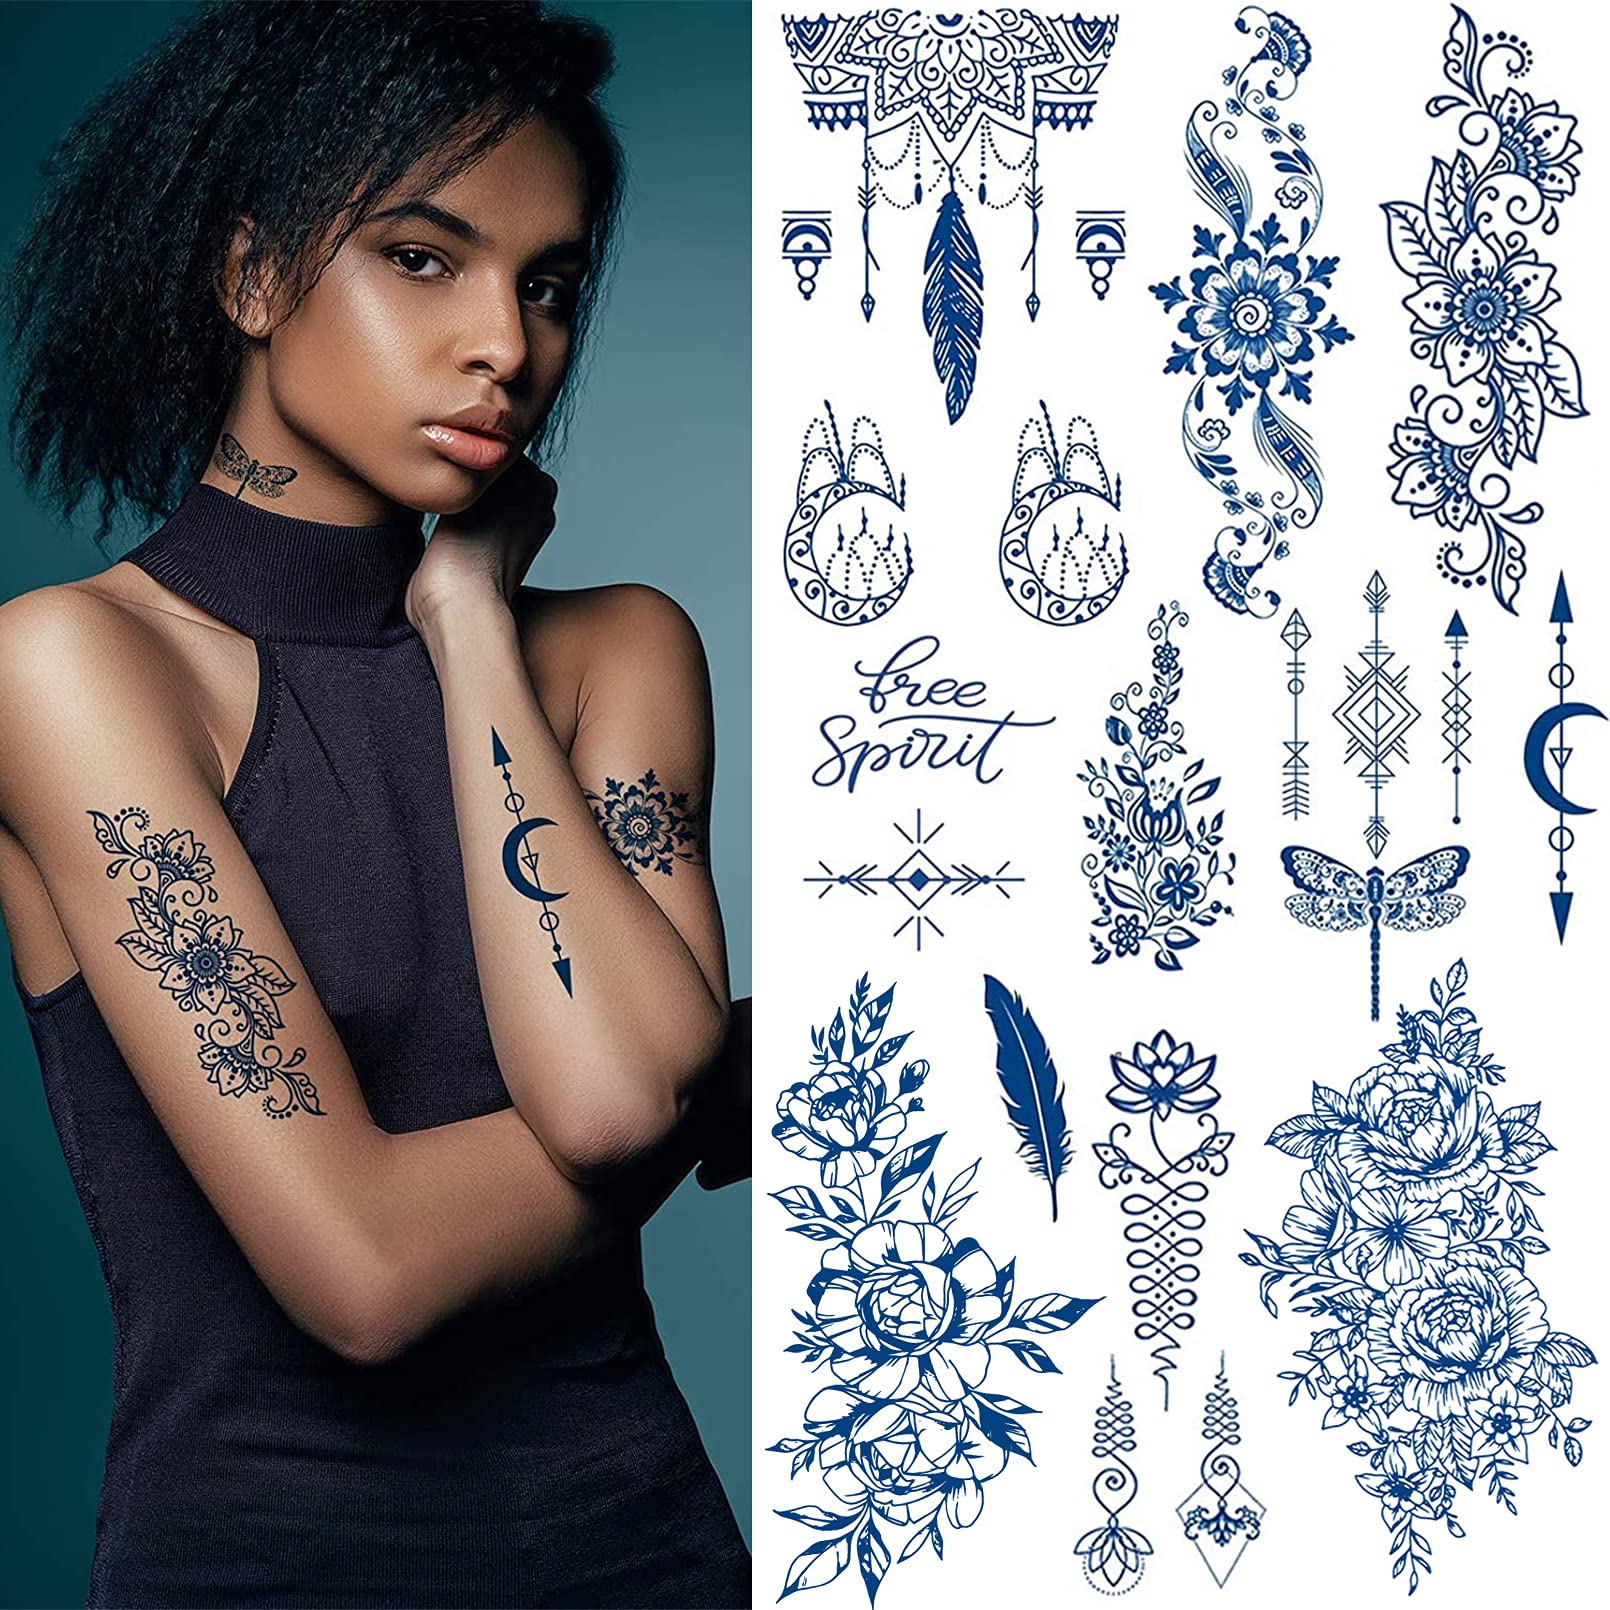 Show Your Connection with These Family-Inspired Temporary Tattoos – Tatteco